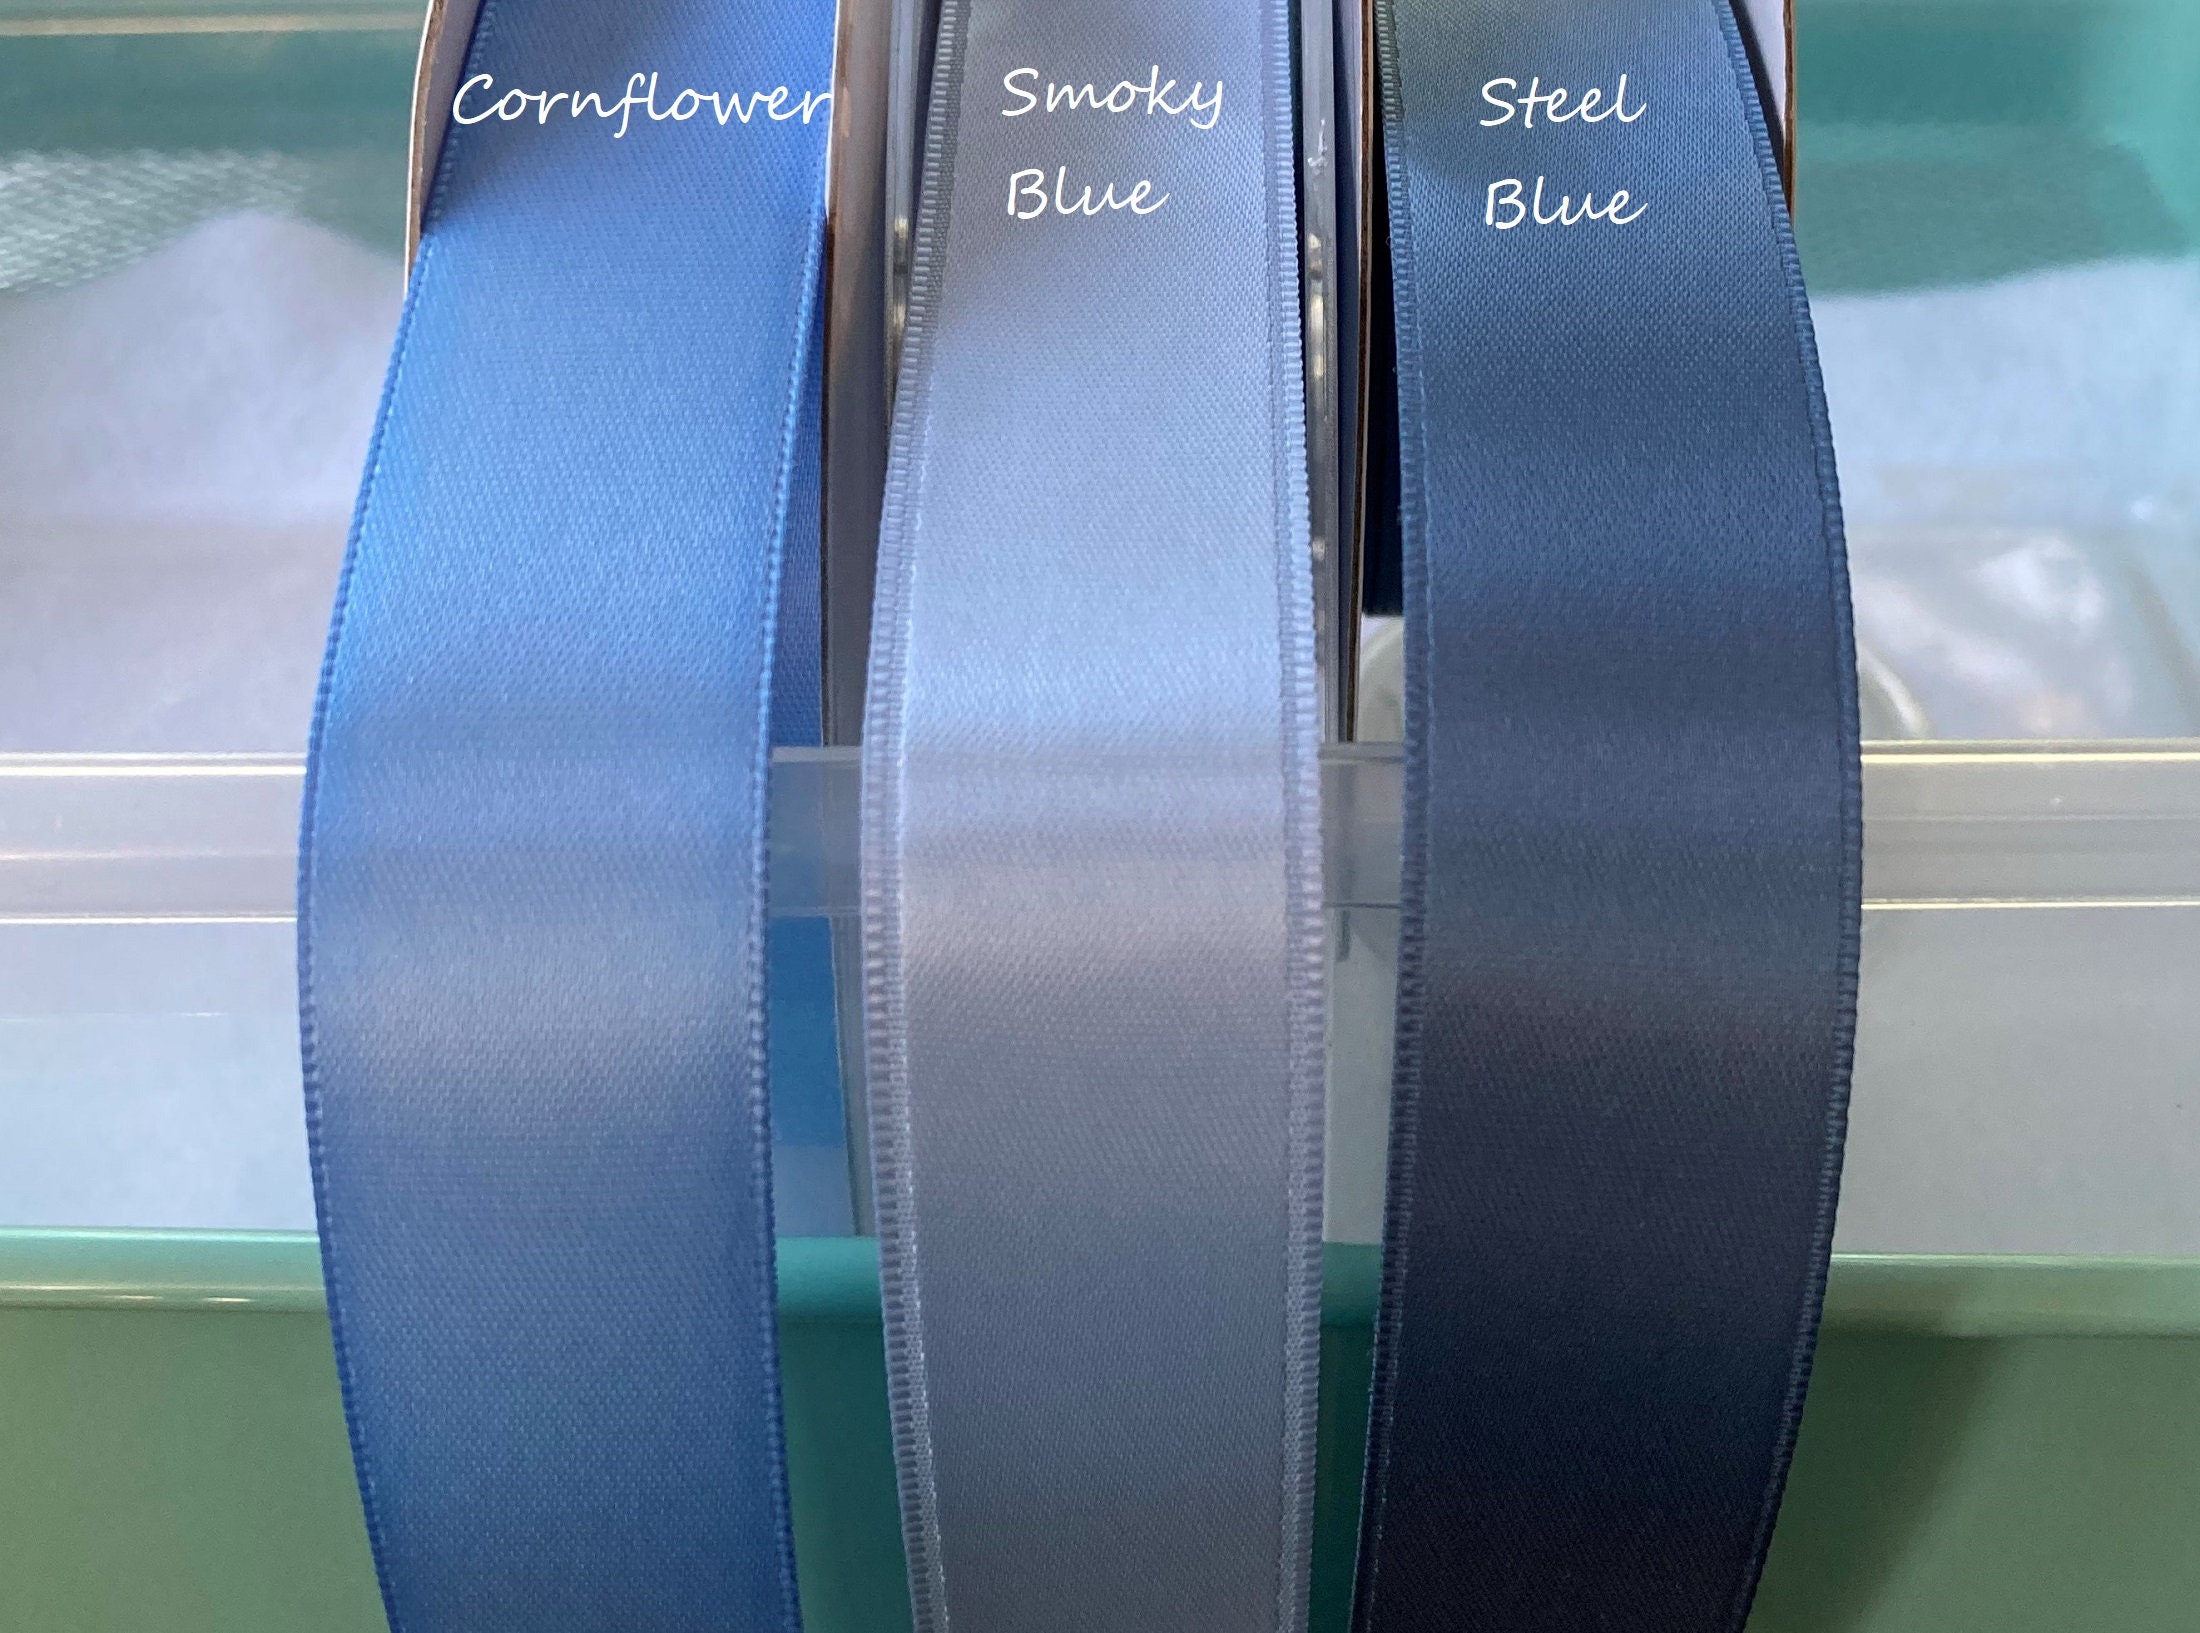 Offray Single Face Satin Ribbon 1-1/2'' Wide X 1 Yard / 11 Colours  Available/ USA Made Ribbons / Berwick Offray Satin Ribbon/ Aussie Seller 